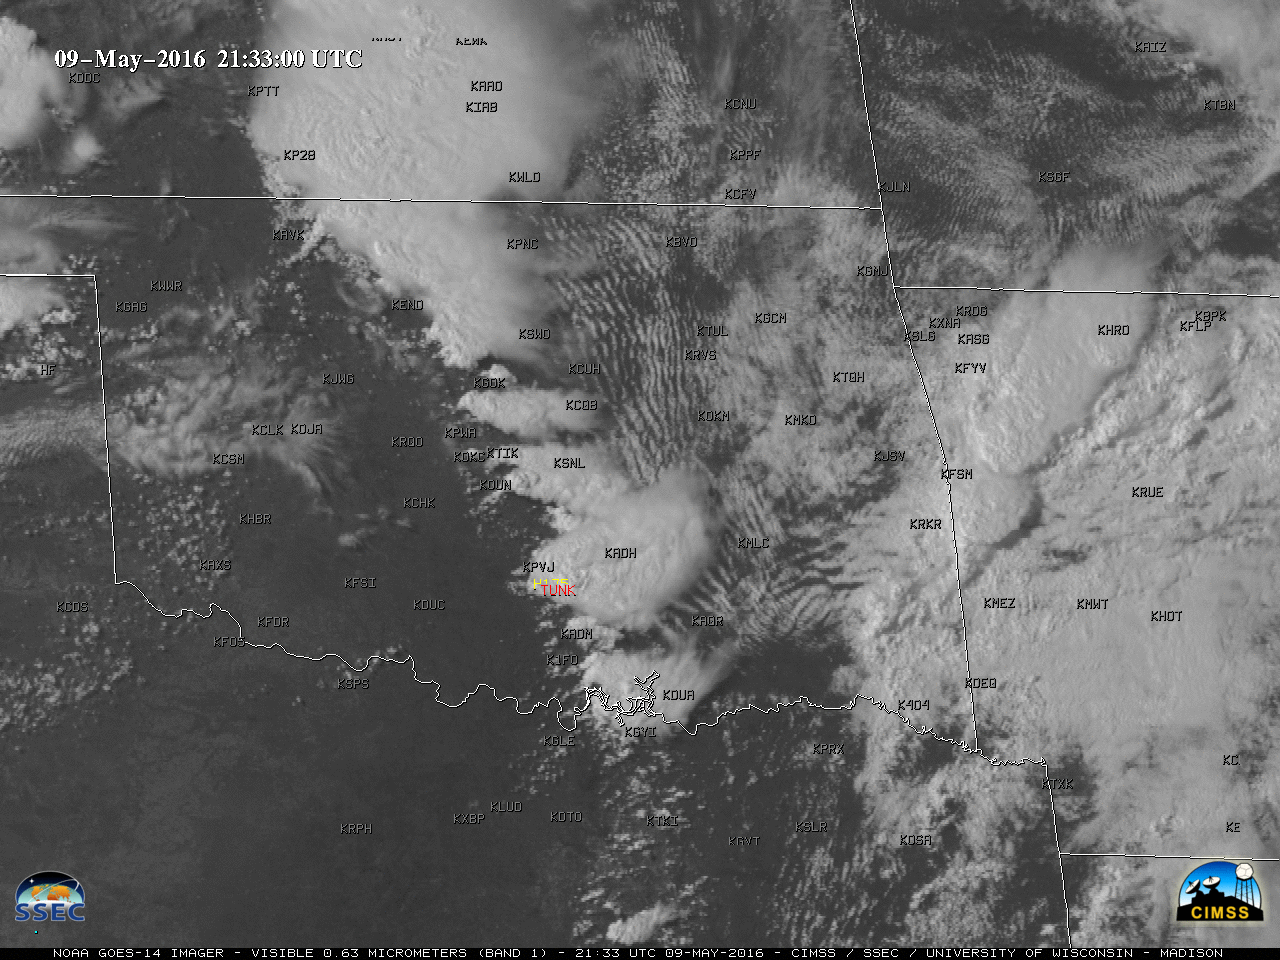 GOES-14 Visible (0.63 um) images, with SPC storm reports [click to play MP4 animation]